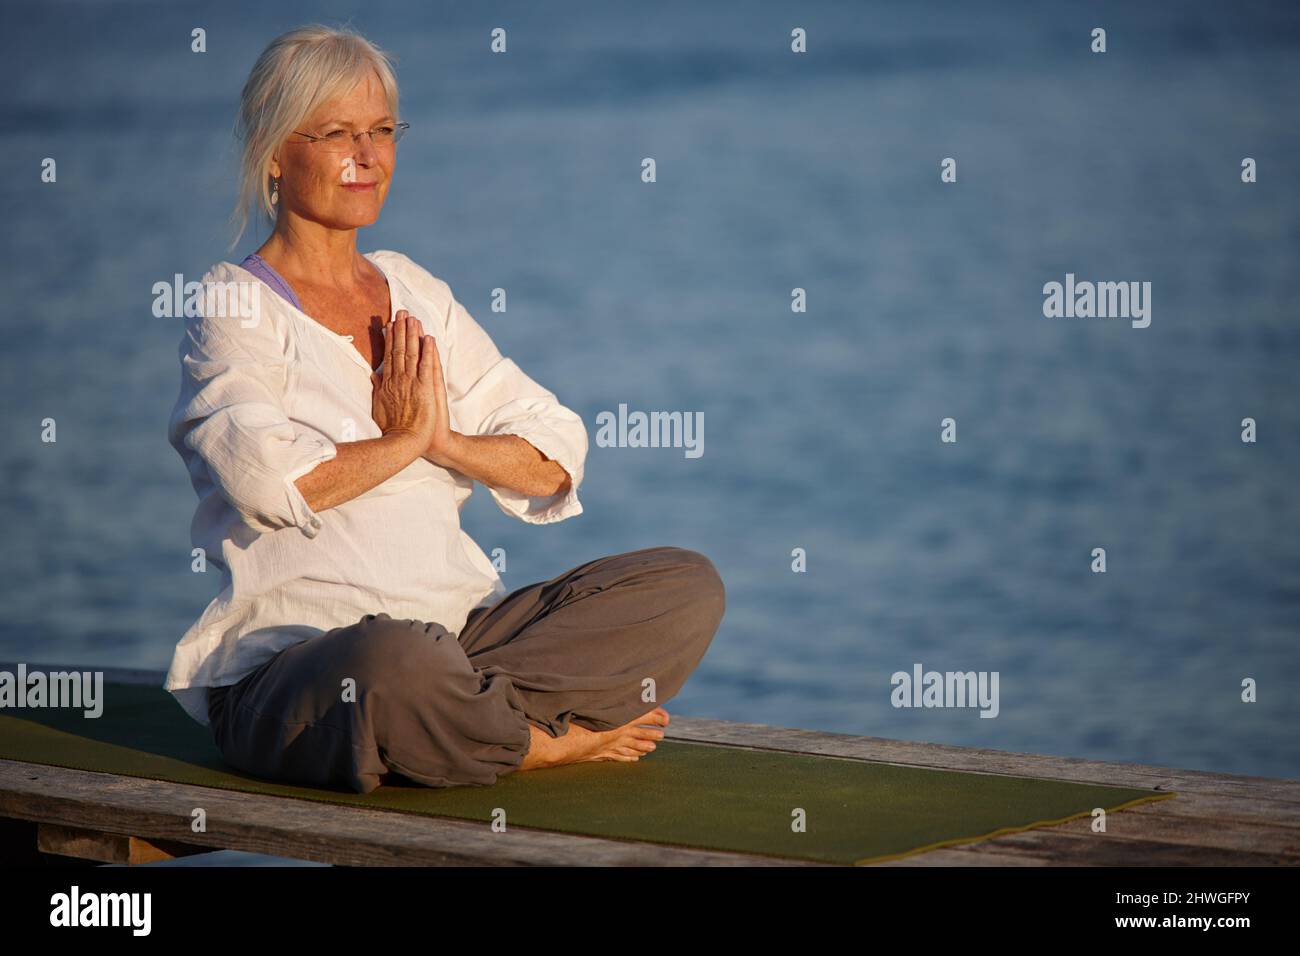 Tranquility by the ocean. Shot of an attractive mature woman doing yoga on a pier out on the ocean. Stock Photo